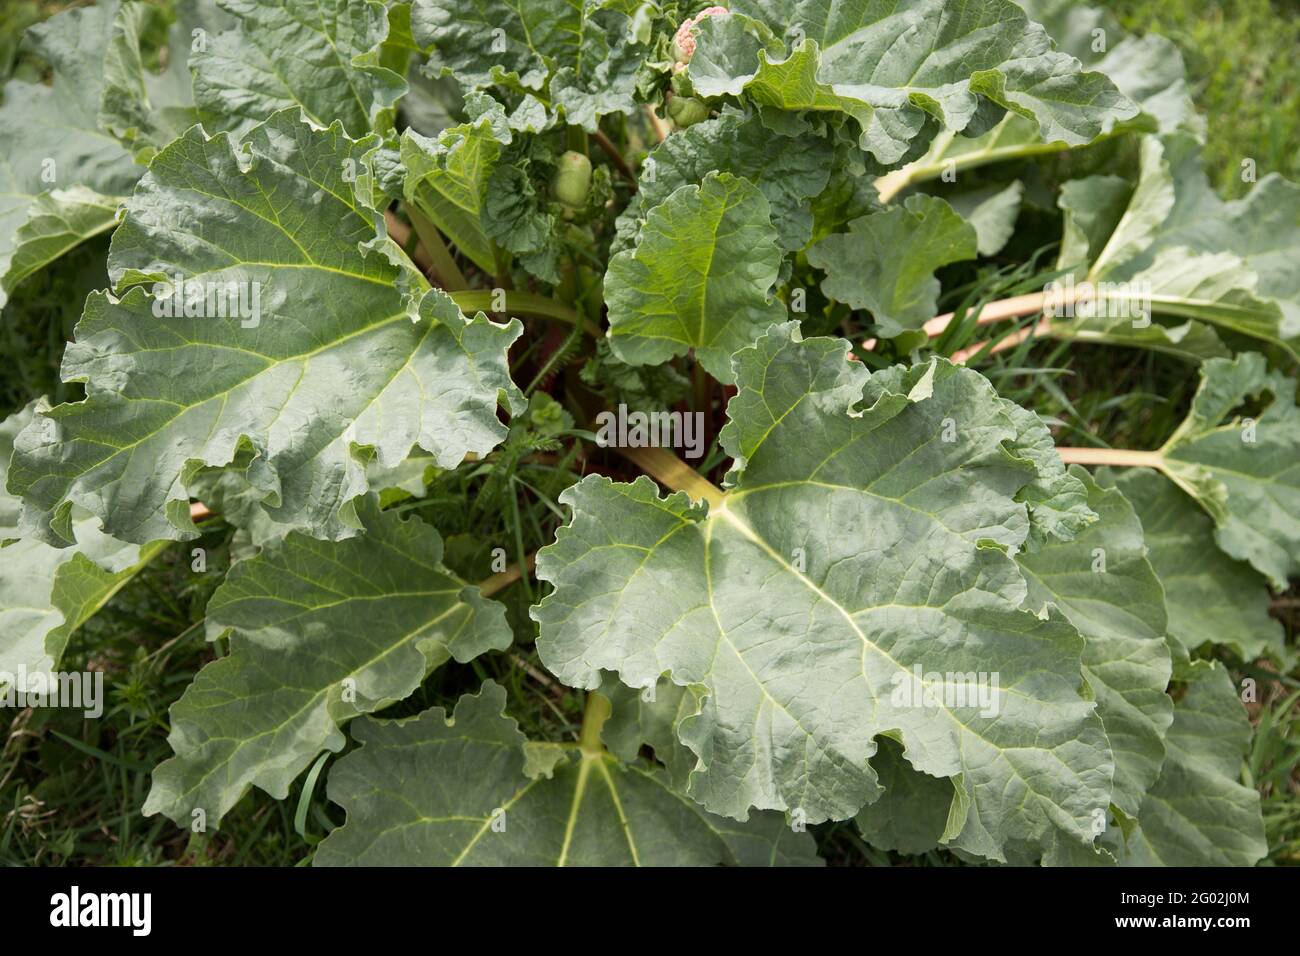 Green leaves of the rhubarb plant used in the preparation of healthy beverages. Stock Photo